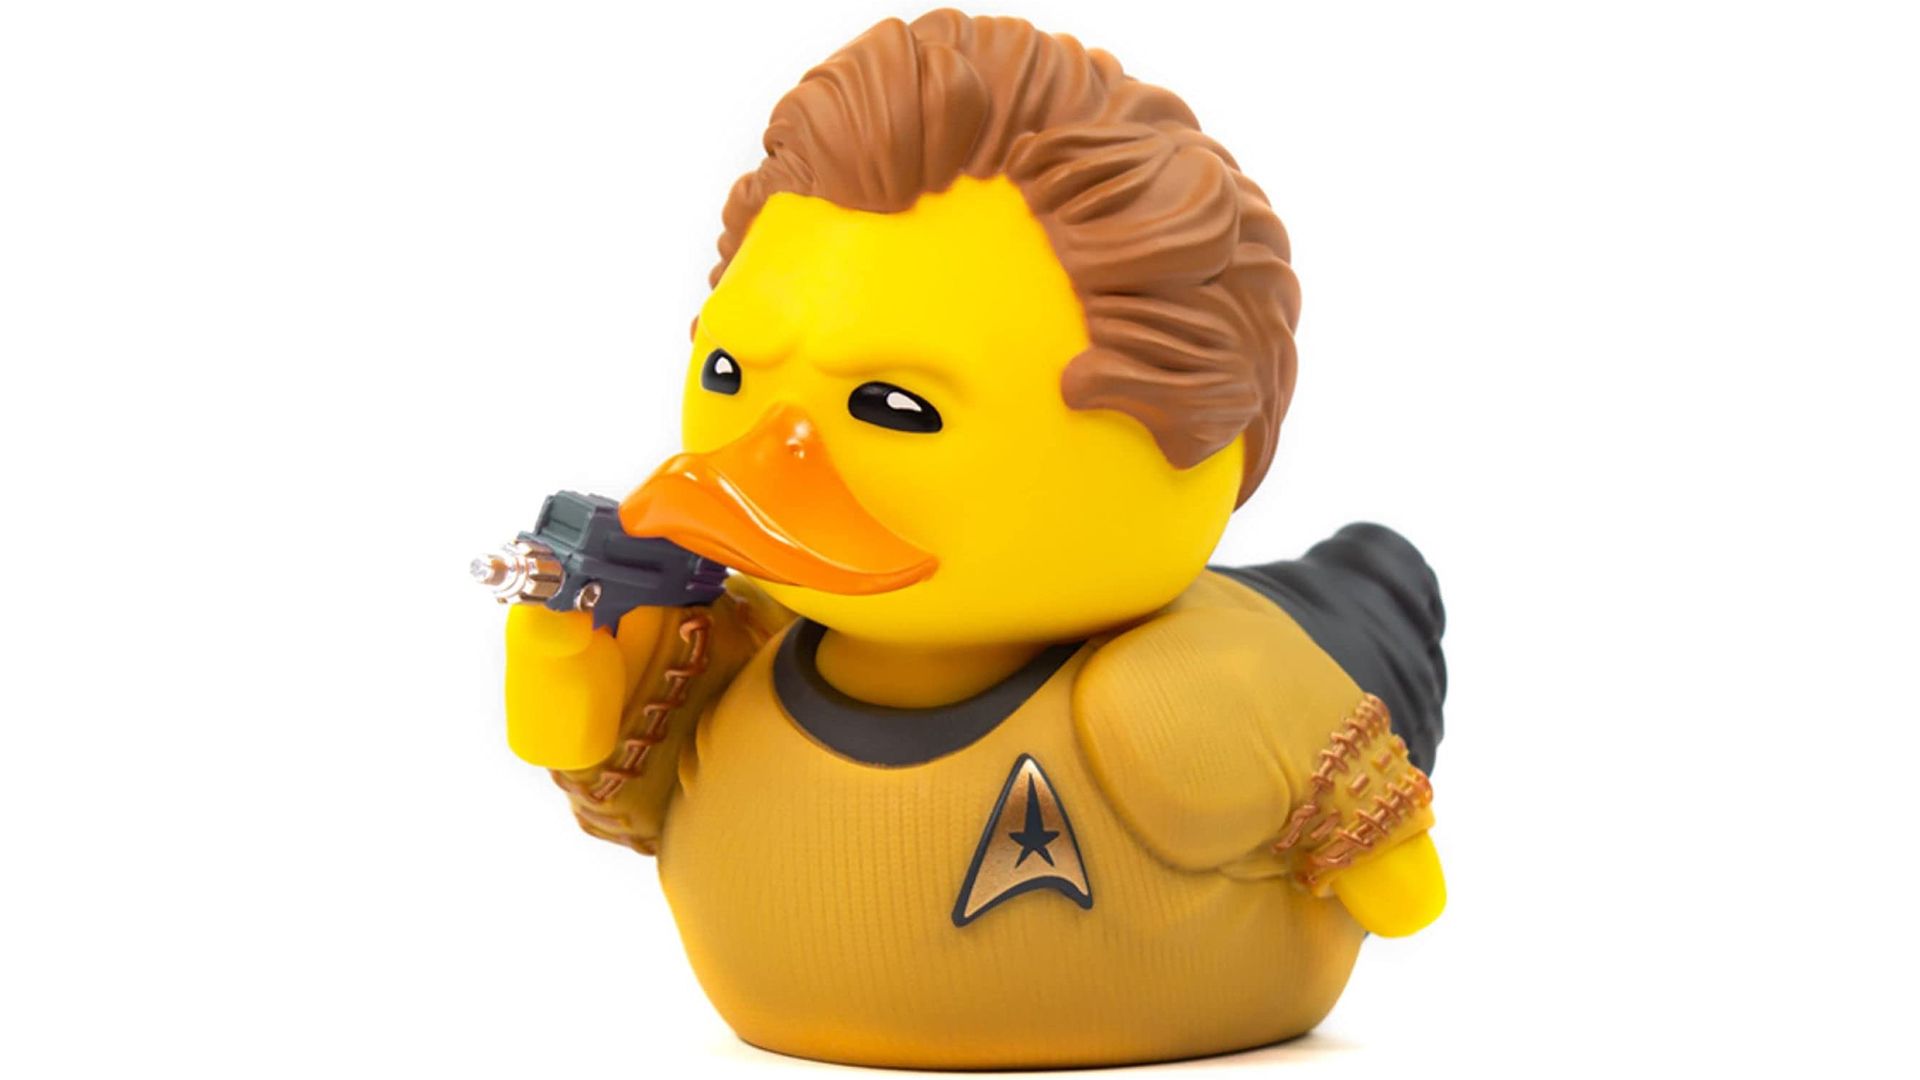 Captain Kirk rubber duck on a white background.